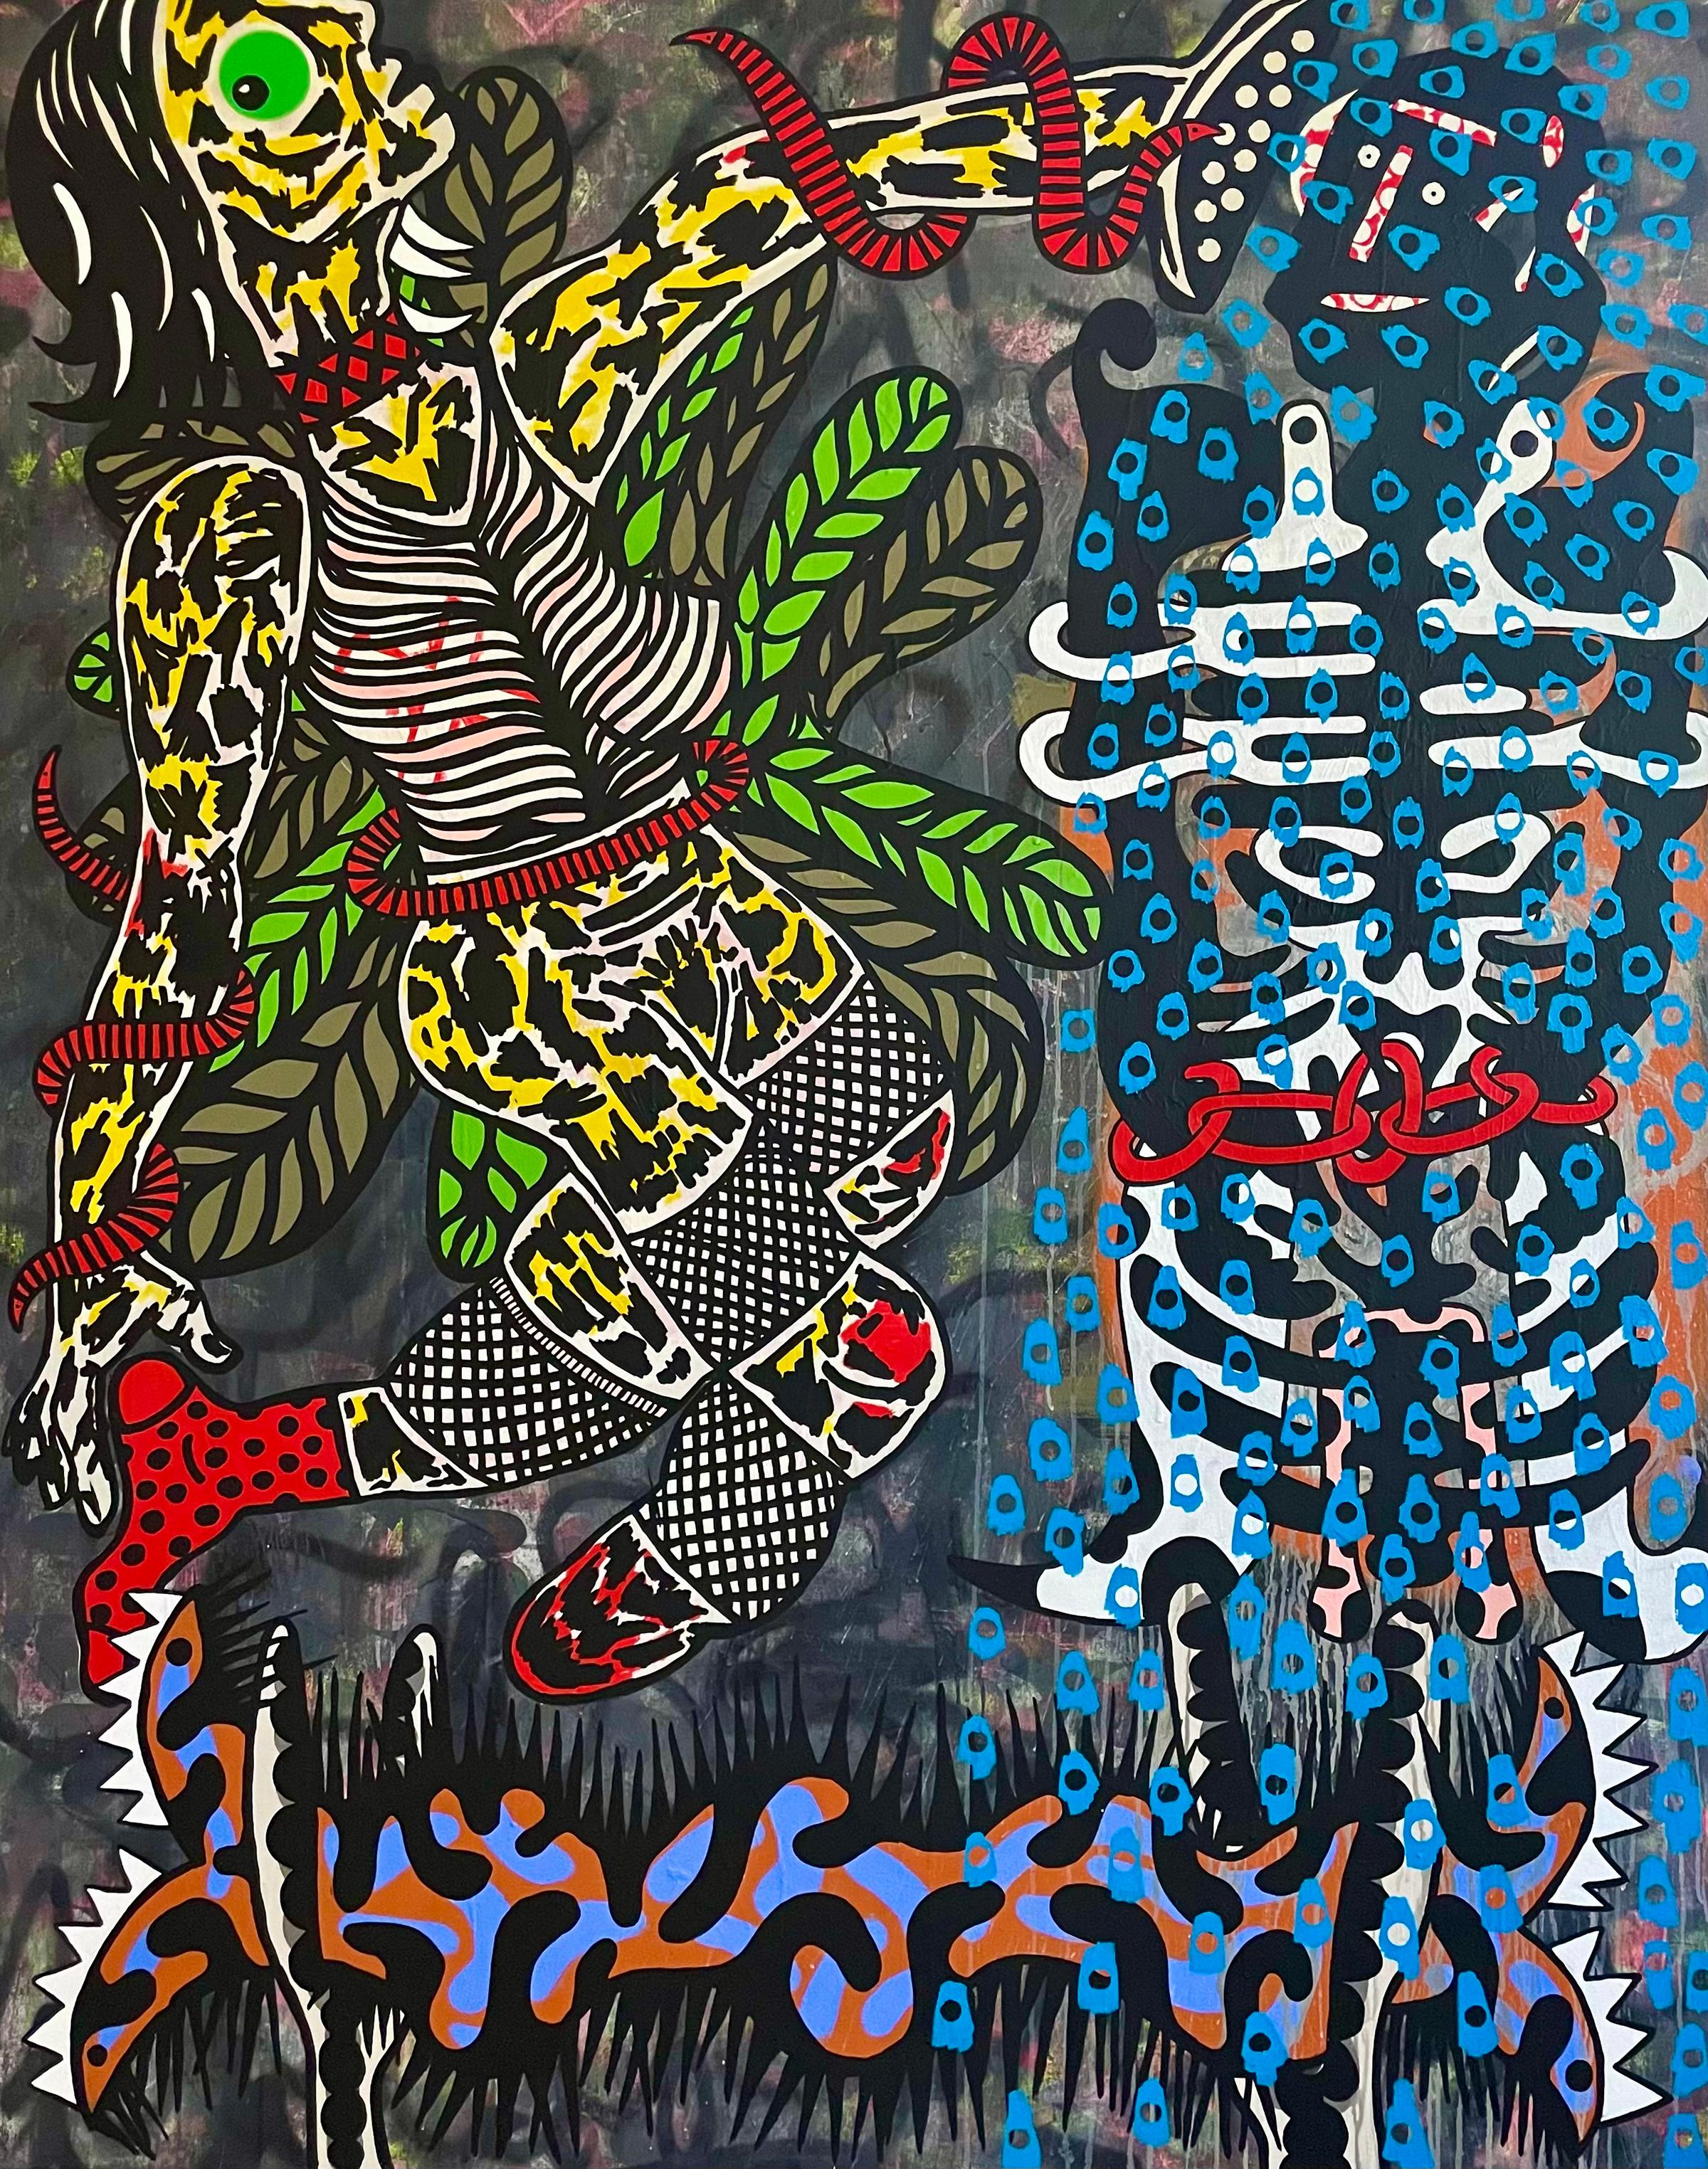 Esteban Patino Abstract Painting - 'I Will Be Your Slave' - surrealist, large-scale painting, colorful, patterns